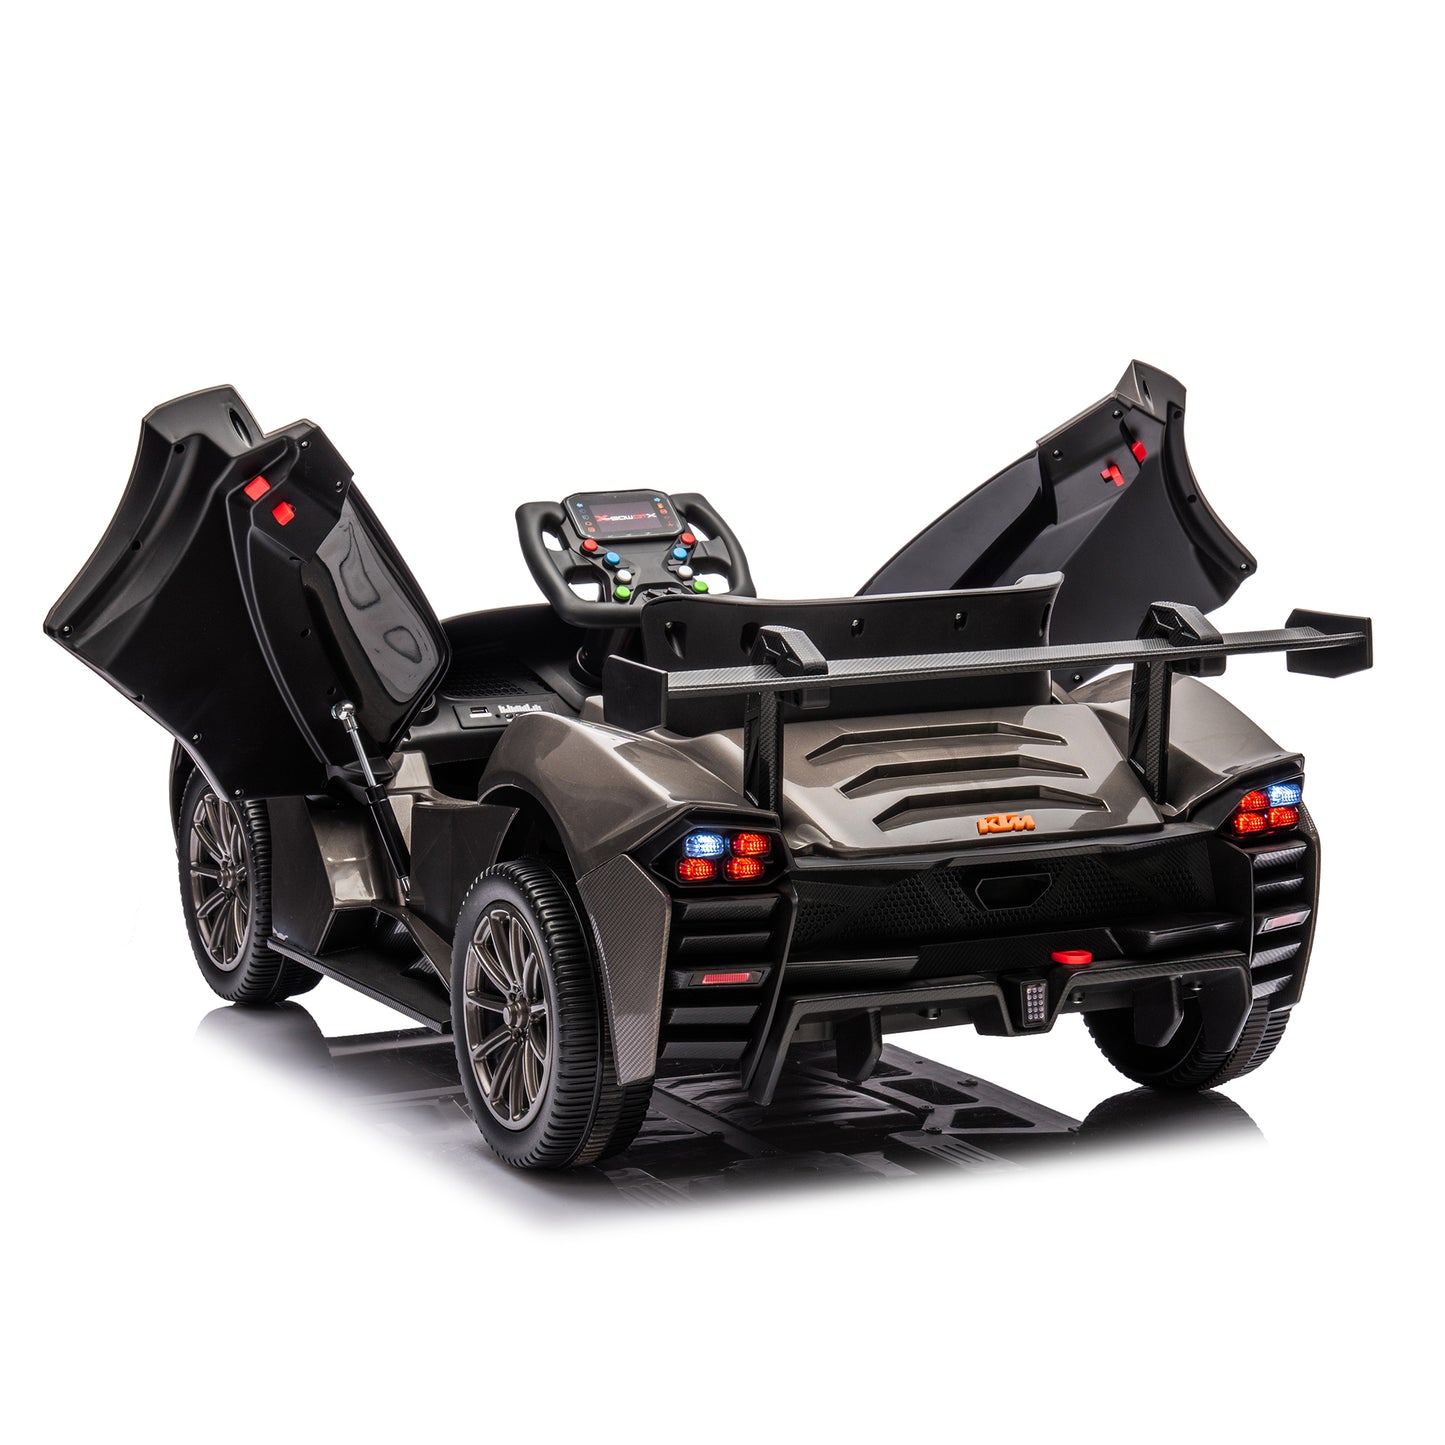 Licensed KTM x BOW GTX,12v7A Kids ride on car 2.4G W/Parents Remote Control, Electric car for kids, Three speed adjustable, Power display, USB,MP3 ,Bluetooth, LED light, Two-point safety belt